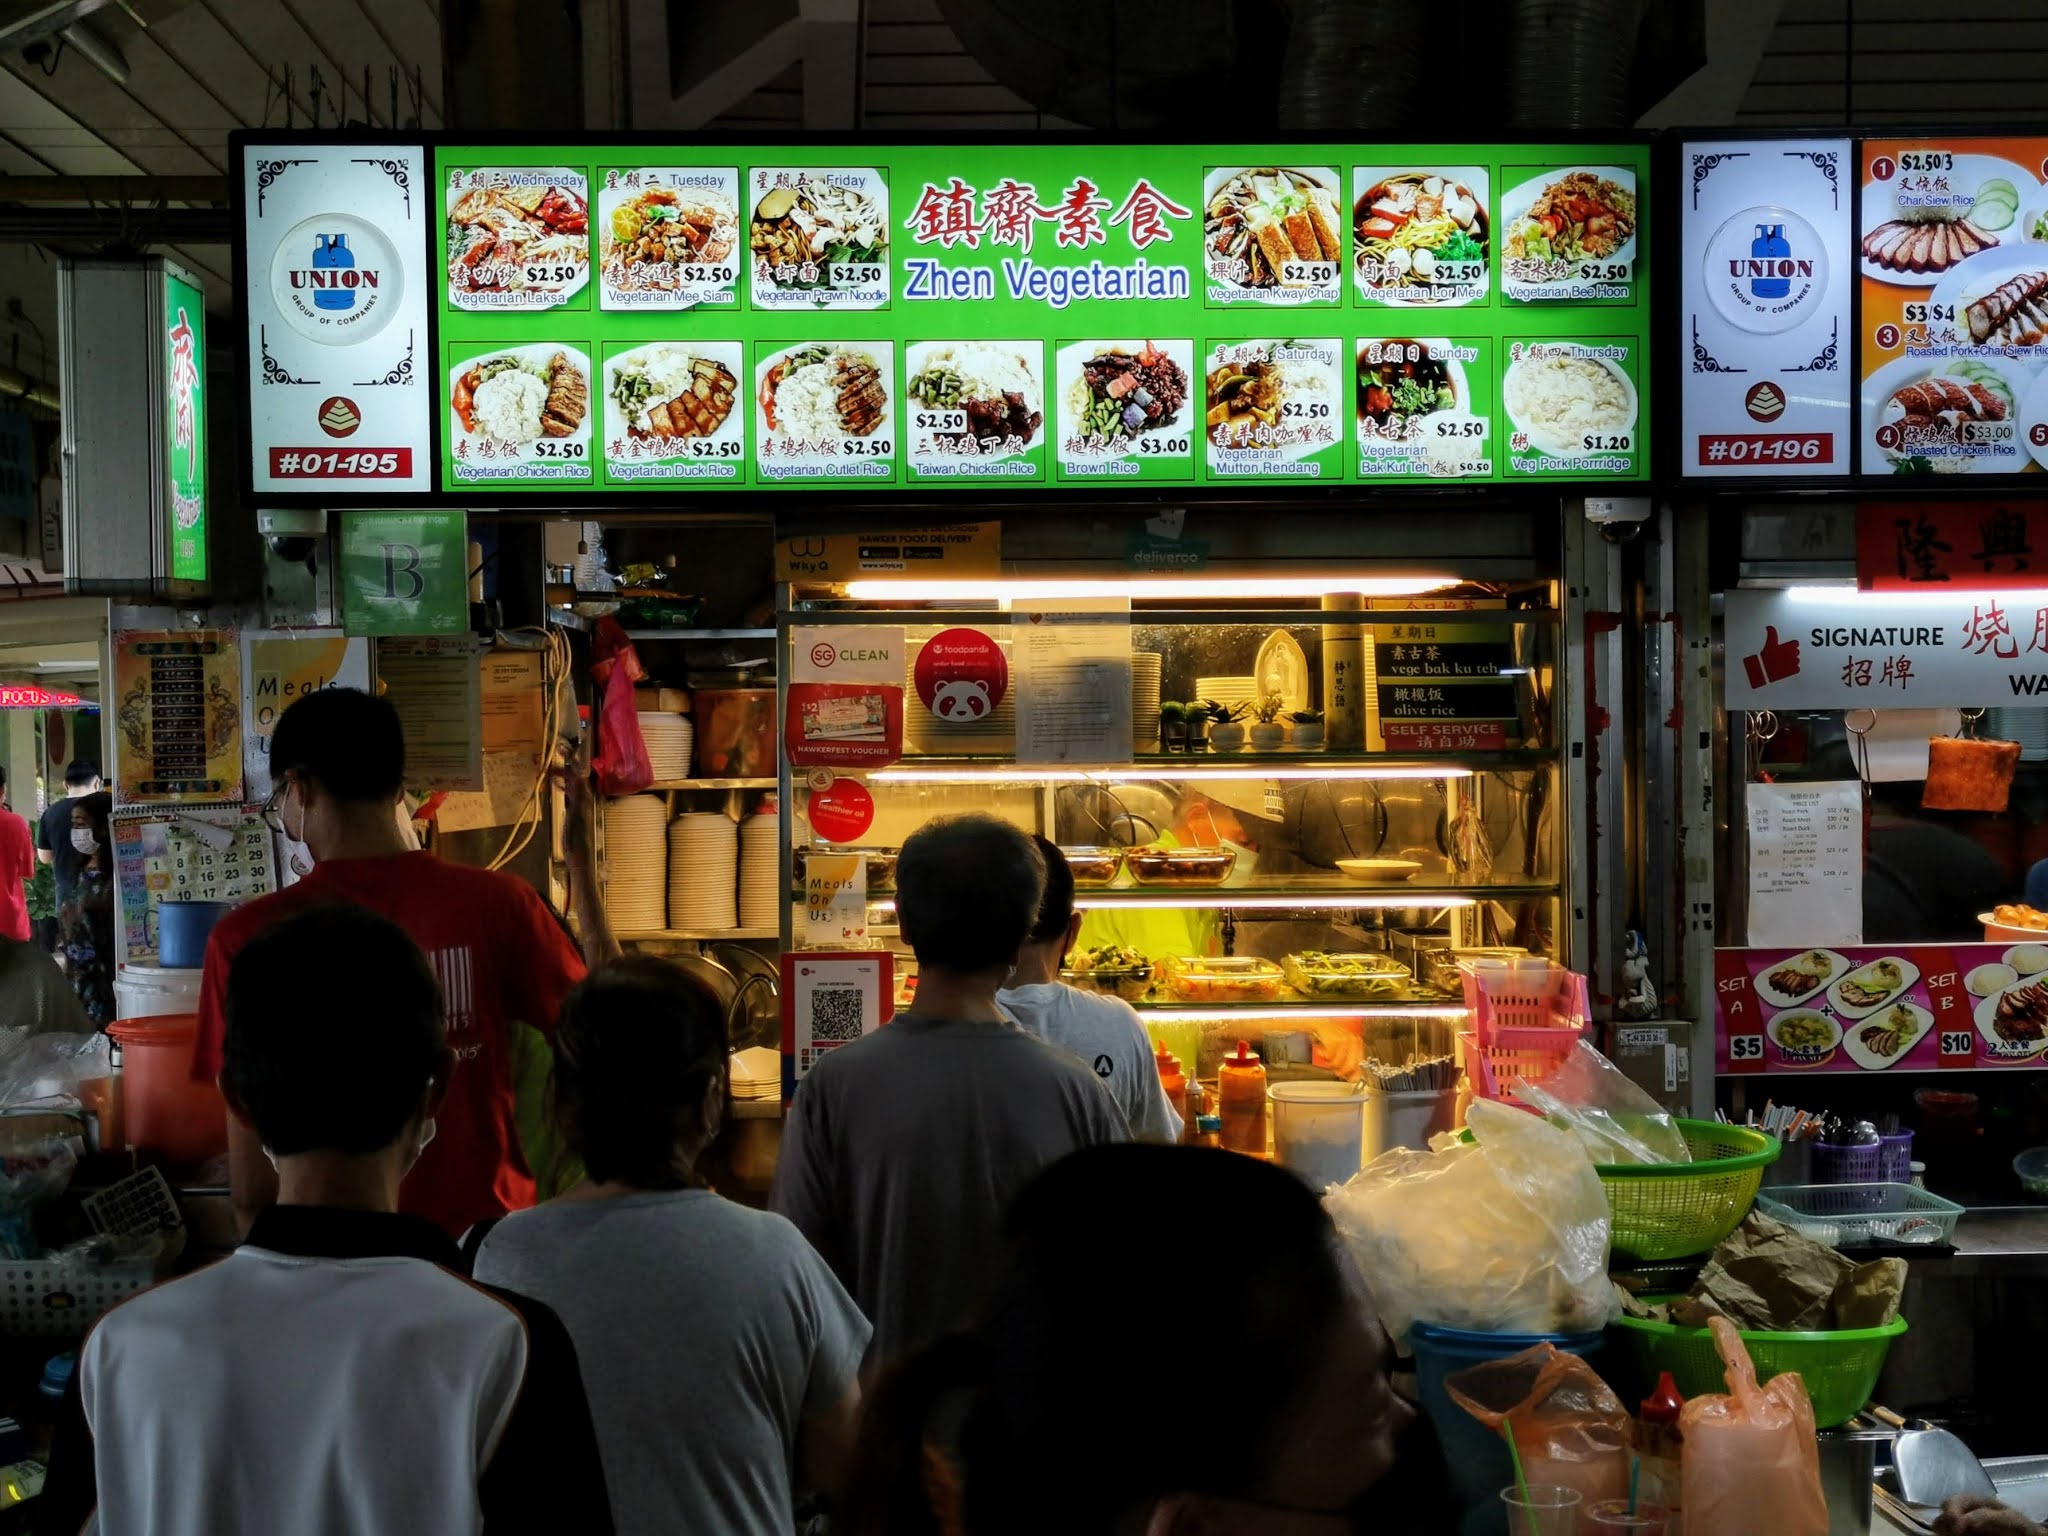 What To Eat Yuhua Place Market Hawker Centre Some Of The Best Food Of Jurong East Singapore West Tony Johor Kaki Travels For Food Culture Diplomacy